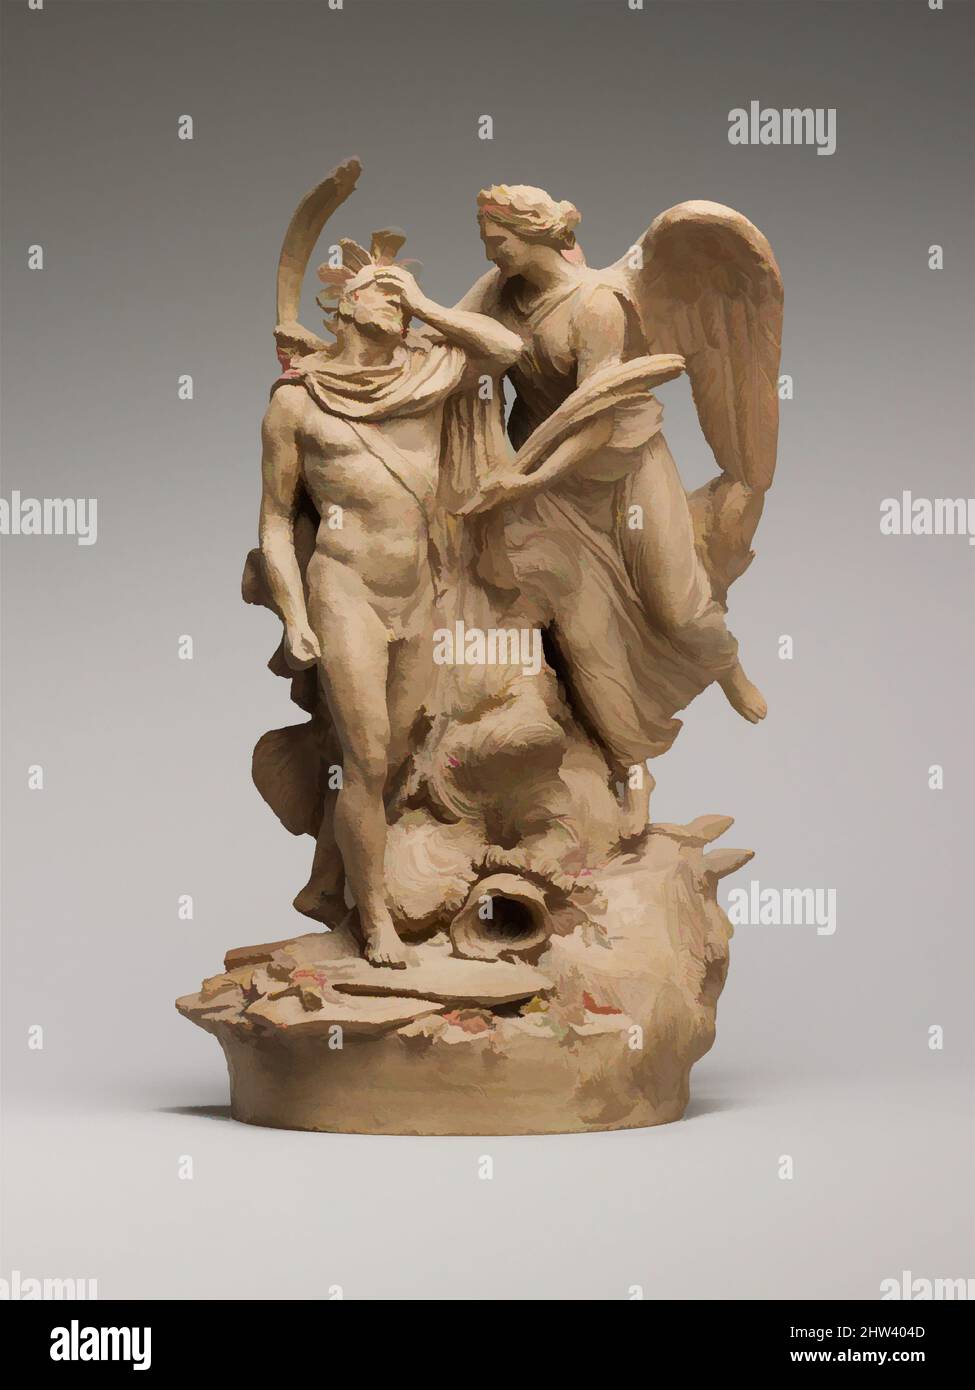 Art inspired by Allegorical Victory of the Grand Condé, 1786, French, Terracotta, 9 × 6 × 4 in. (22.9 × 15.2 × 10.2 cm), Sculpture, Robert Guillaume Dardel (French, 1749–1821), The year 1786 was the centenary of the death of Louis II de Bourbon, prince de Condé, the illustrious warrior, Classic works modernized by Artotop with a splash of modernity. Shapes, color and value, eye-catching visual impact on art. Emotions through freedom of artworks in a contemporary way. A timeless message pursuing a wildly creative new direction. Artists turning to the digital medium and creating the Artotop NFT Stock Photo